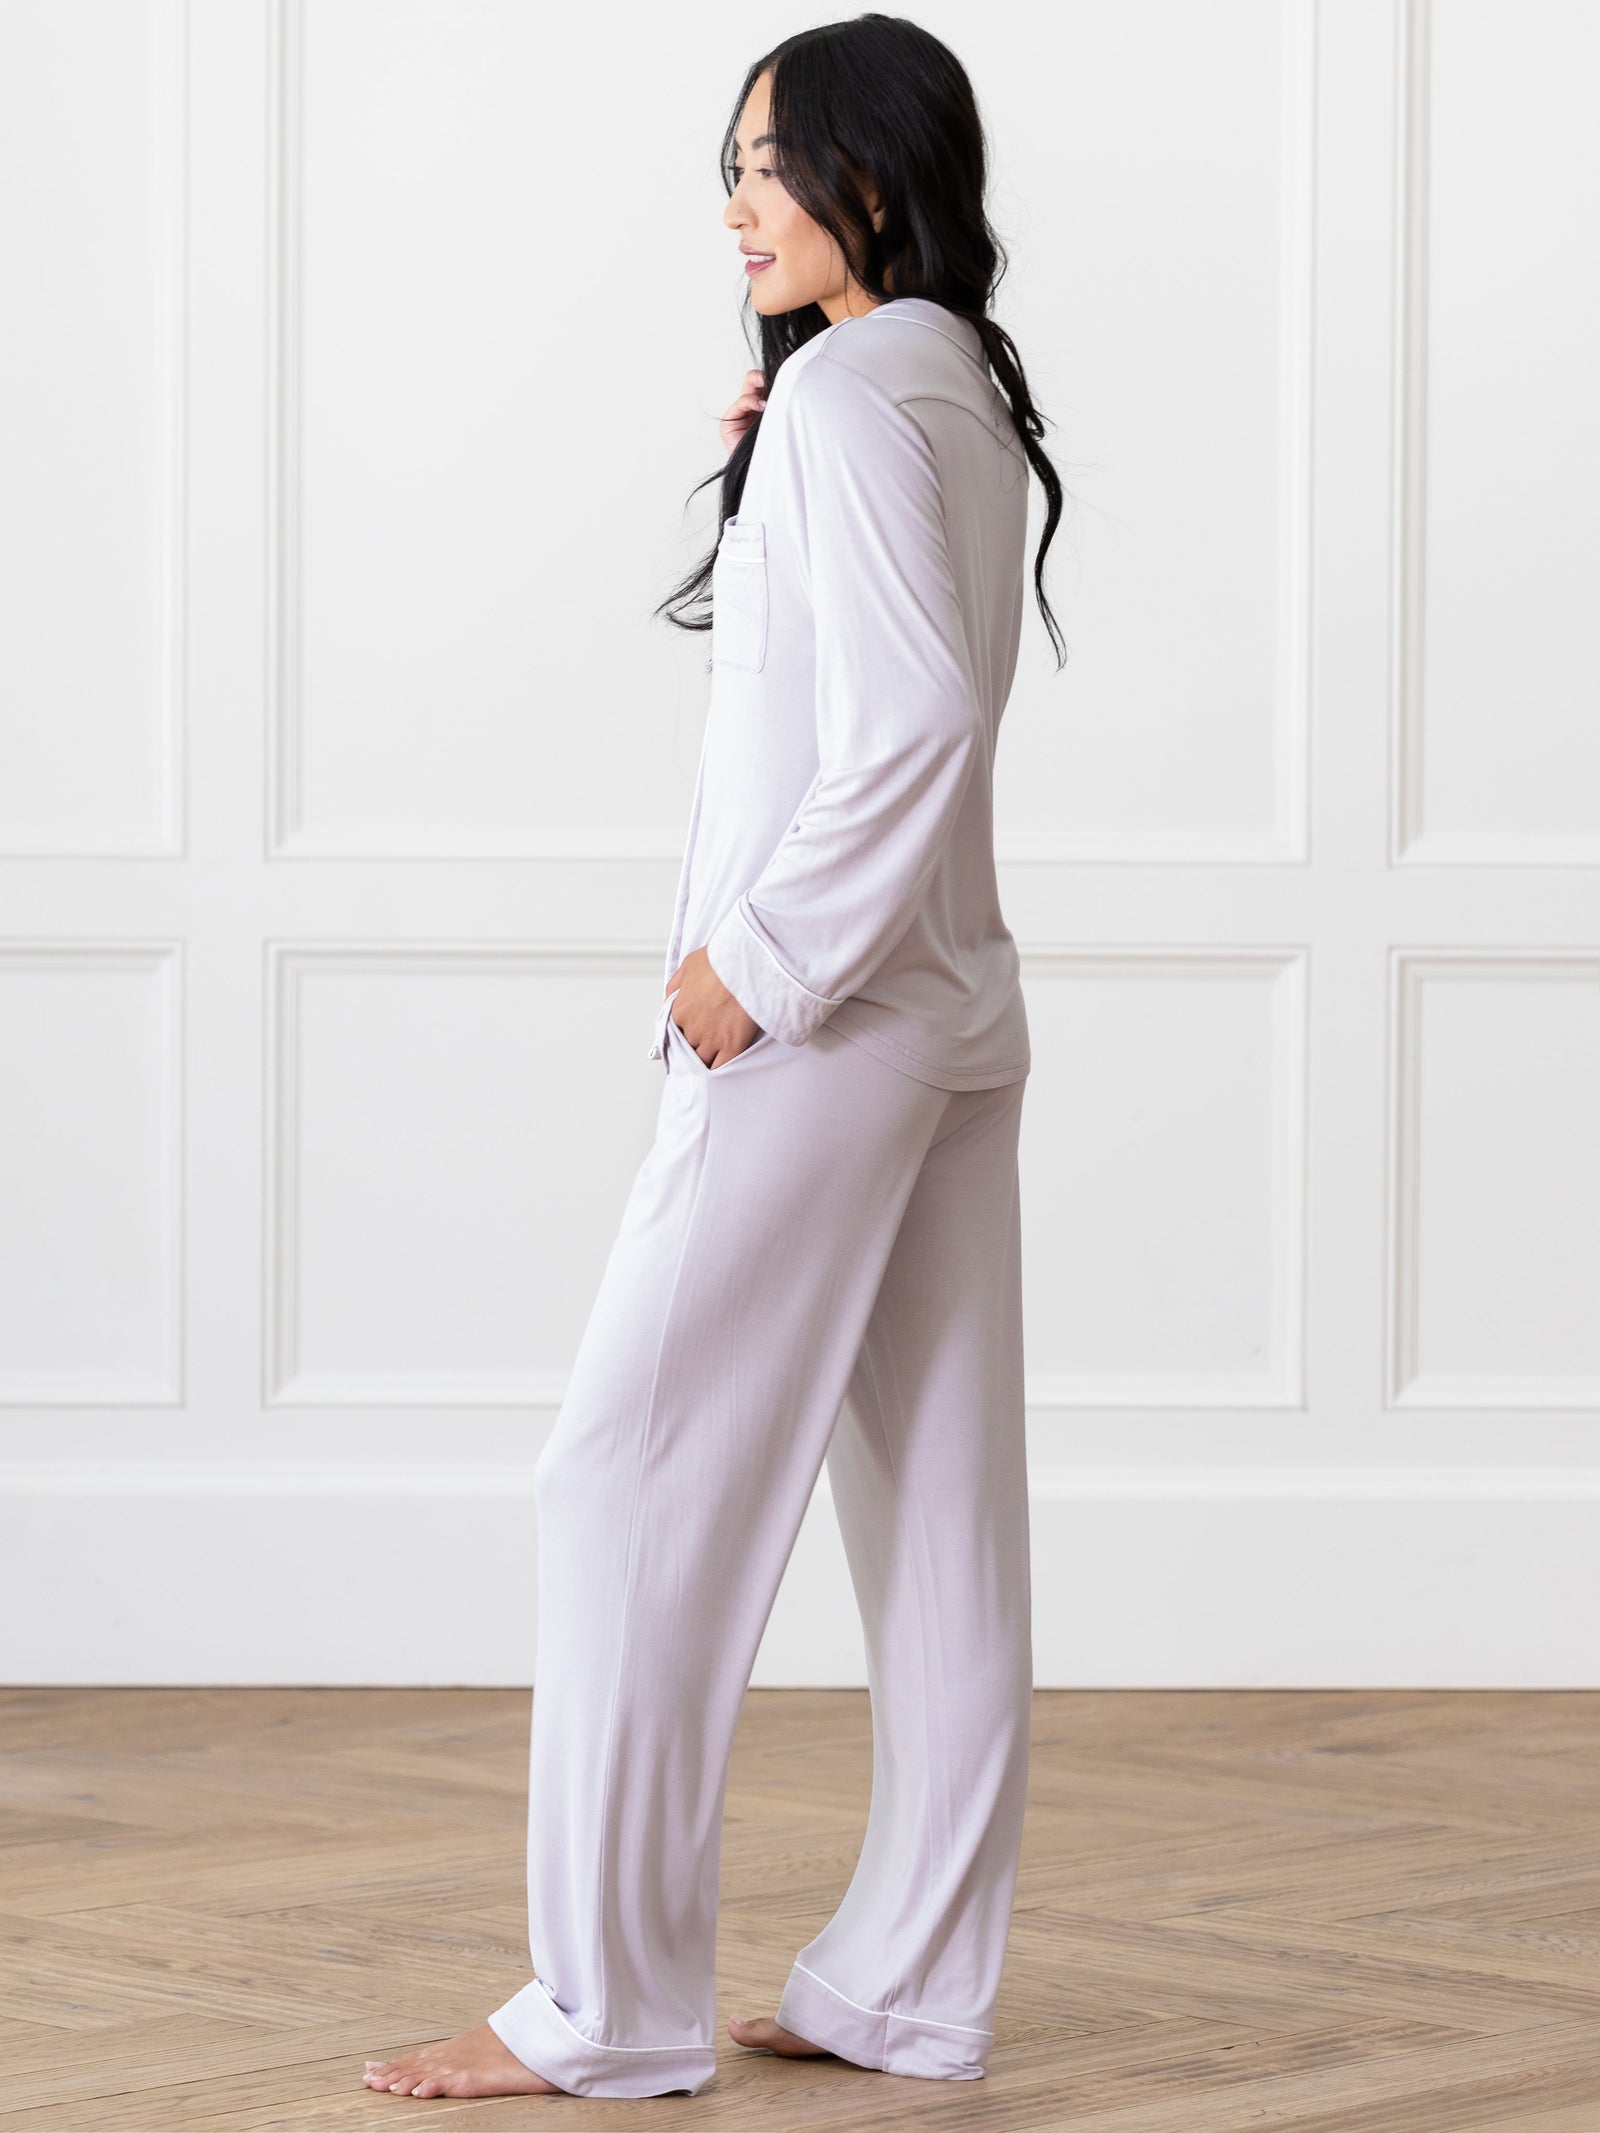 Lilac Long Sleeve Pajama Set modeled by a woman. The photo was taken in a high contrast setting, showing off the colors and lines of the pajamas. 